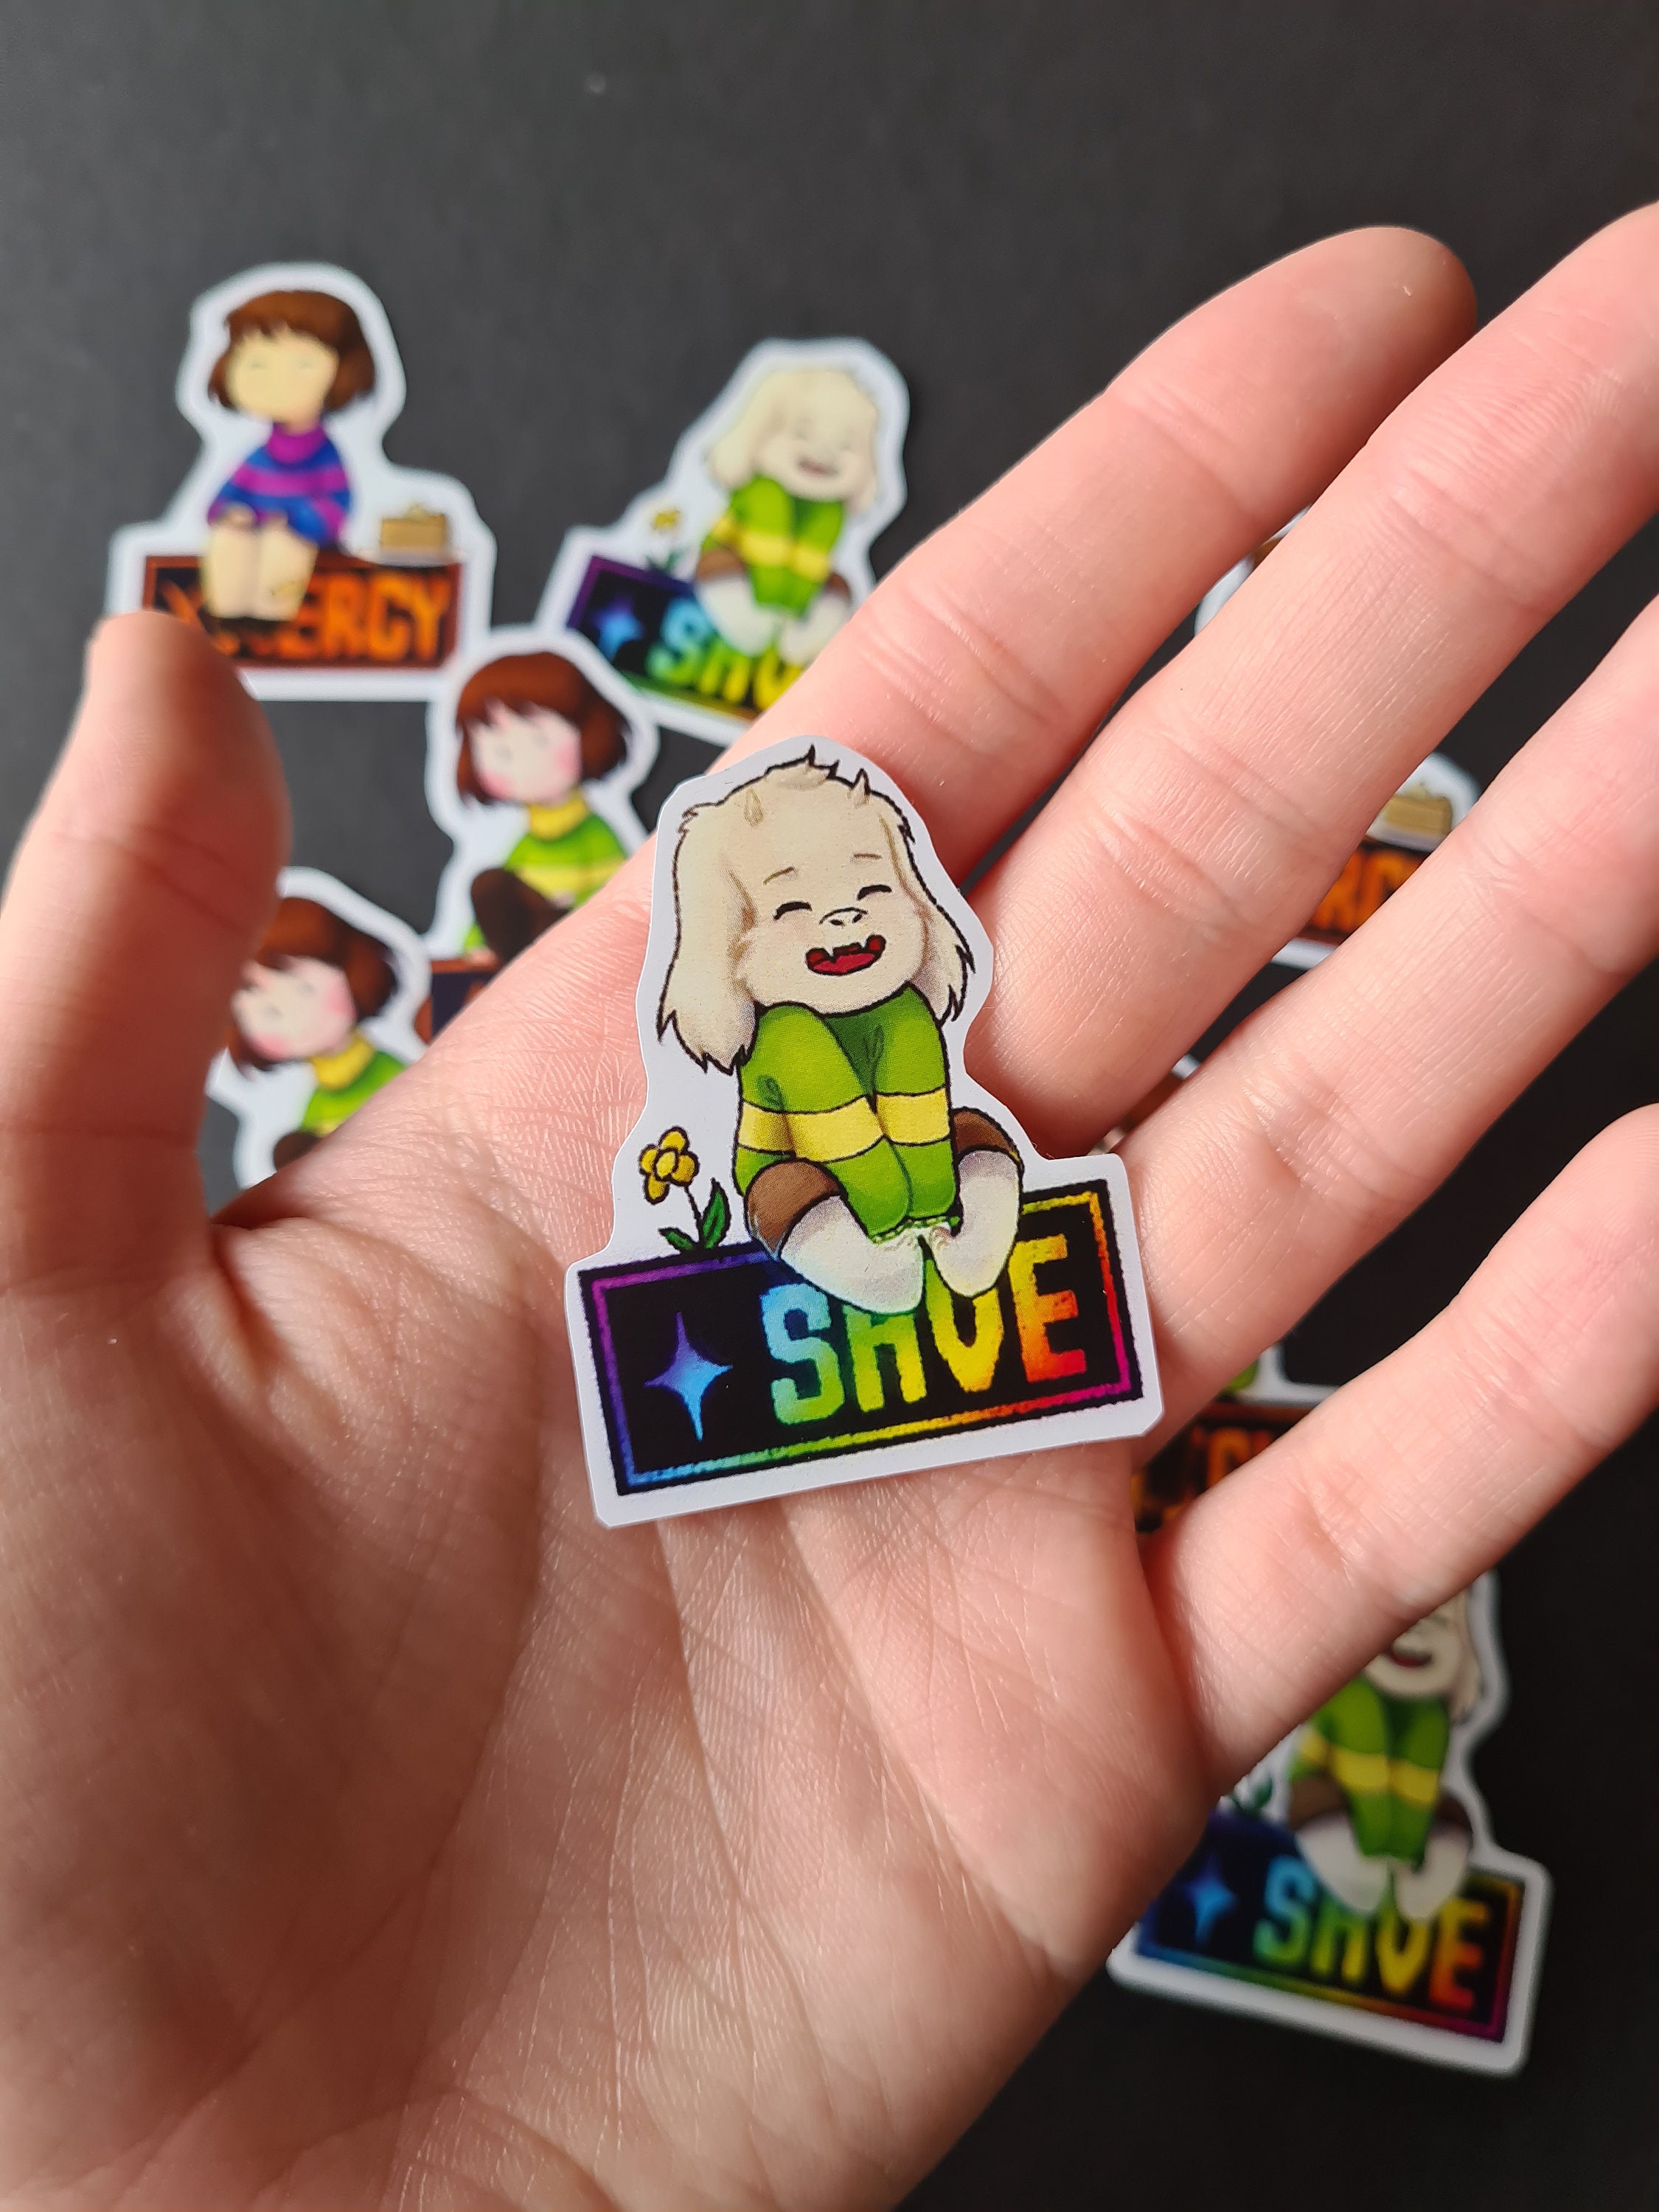 Undertale Asriel Chara and Frisk Stickers 